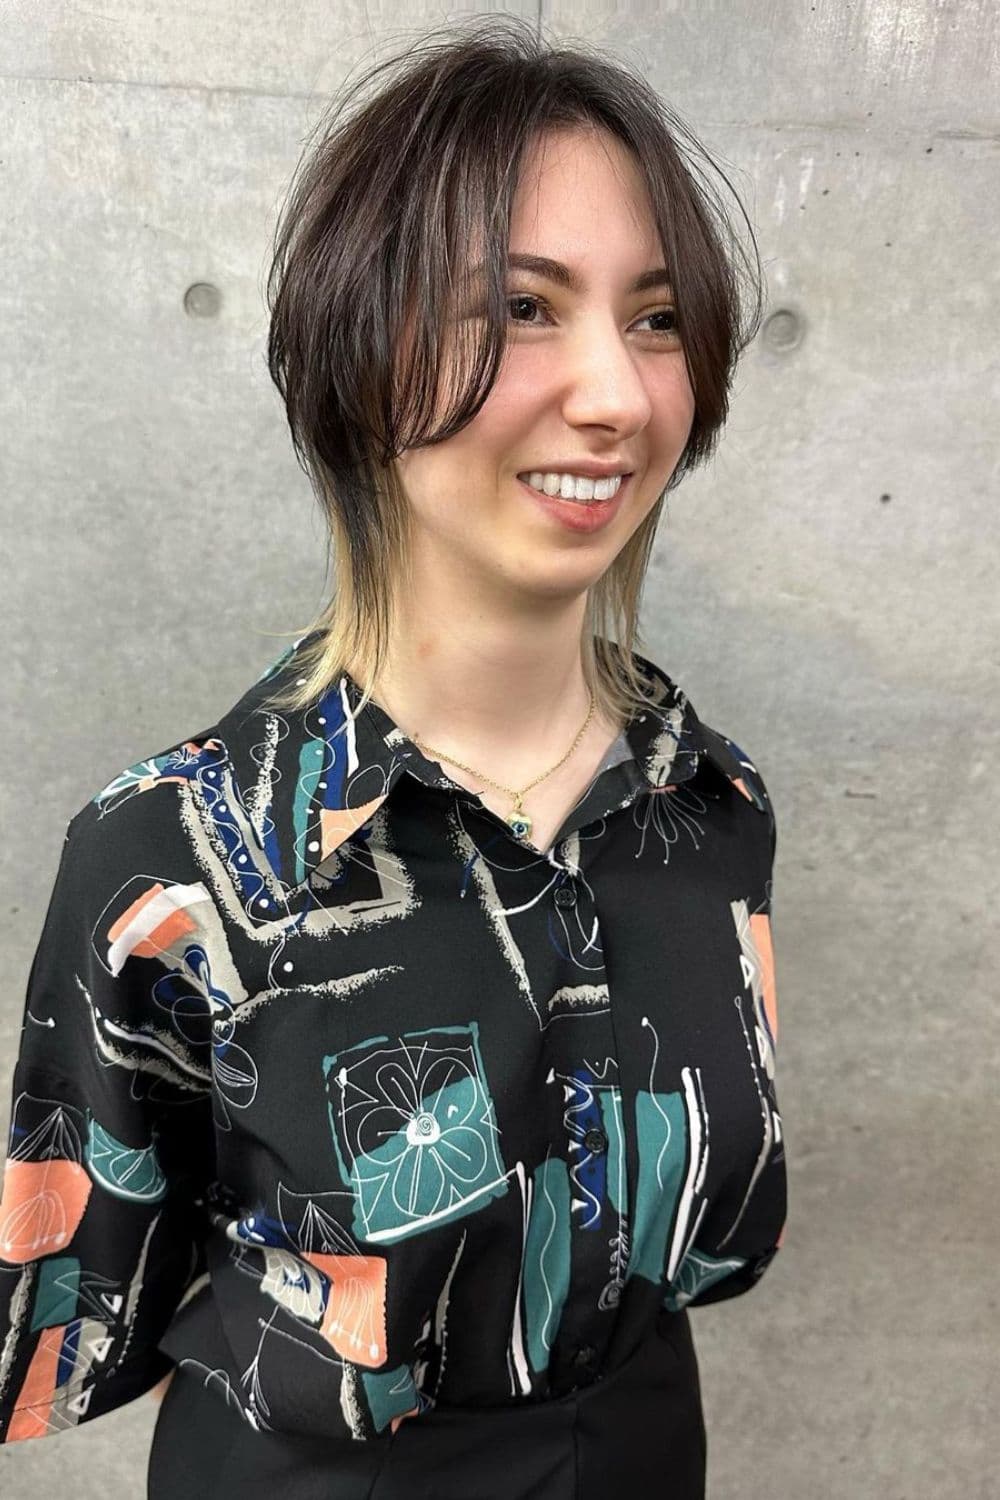 A woman wearing a black buttoned blouse with print and a short black and blonde peekaboo wolf cut.